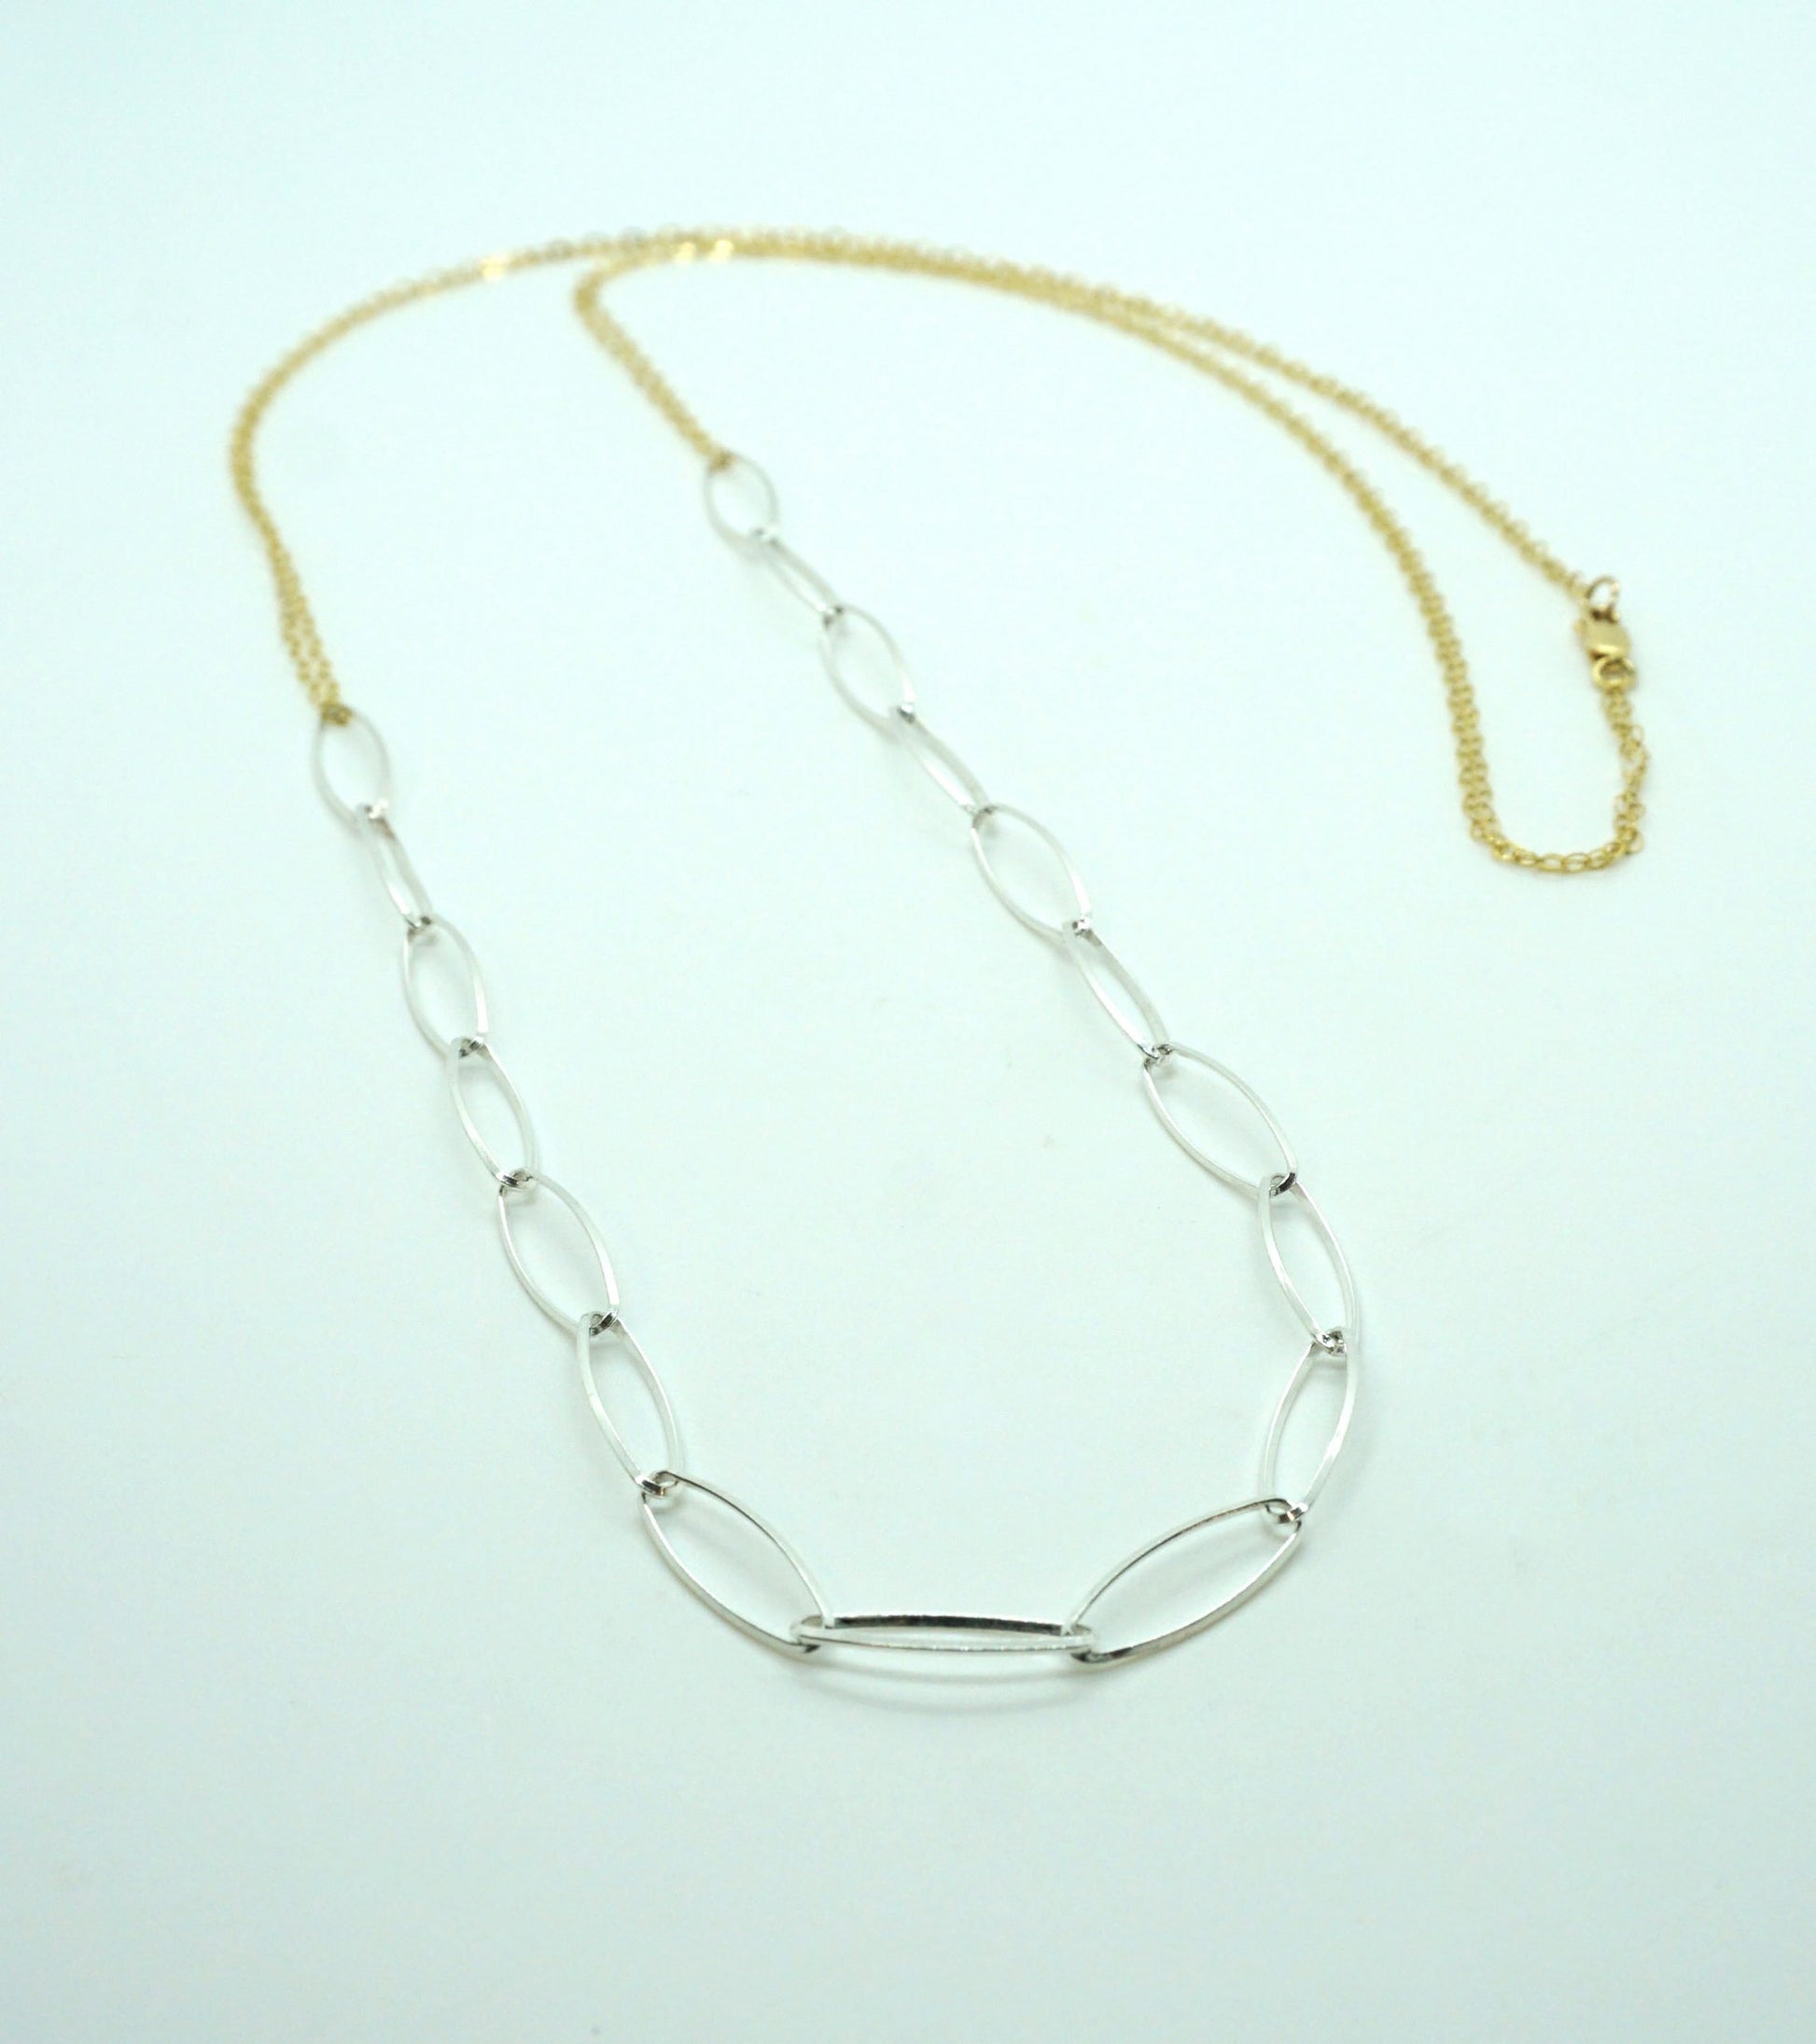 14k gold fill and silver chain mixed metal necklace